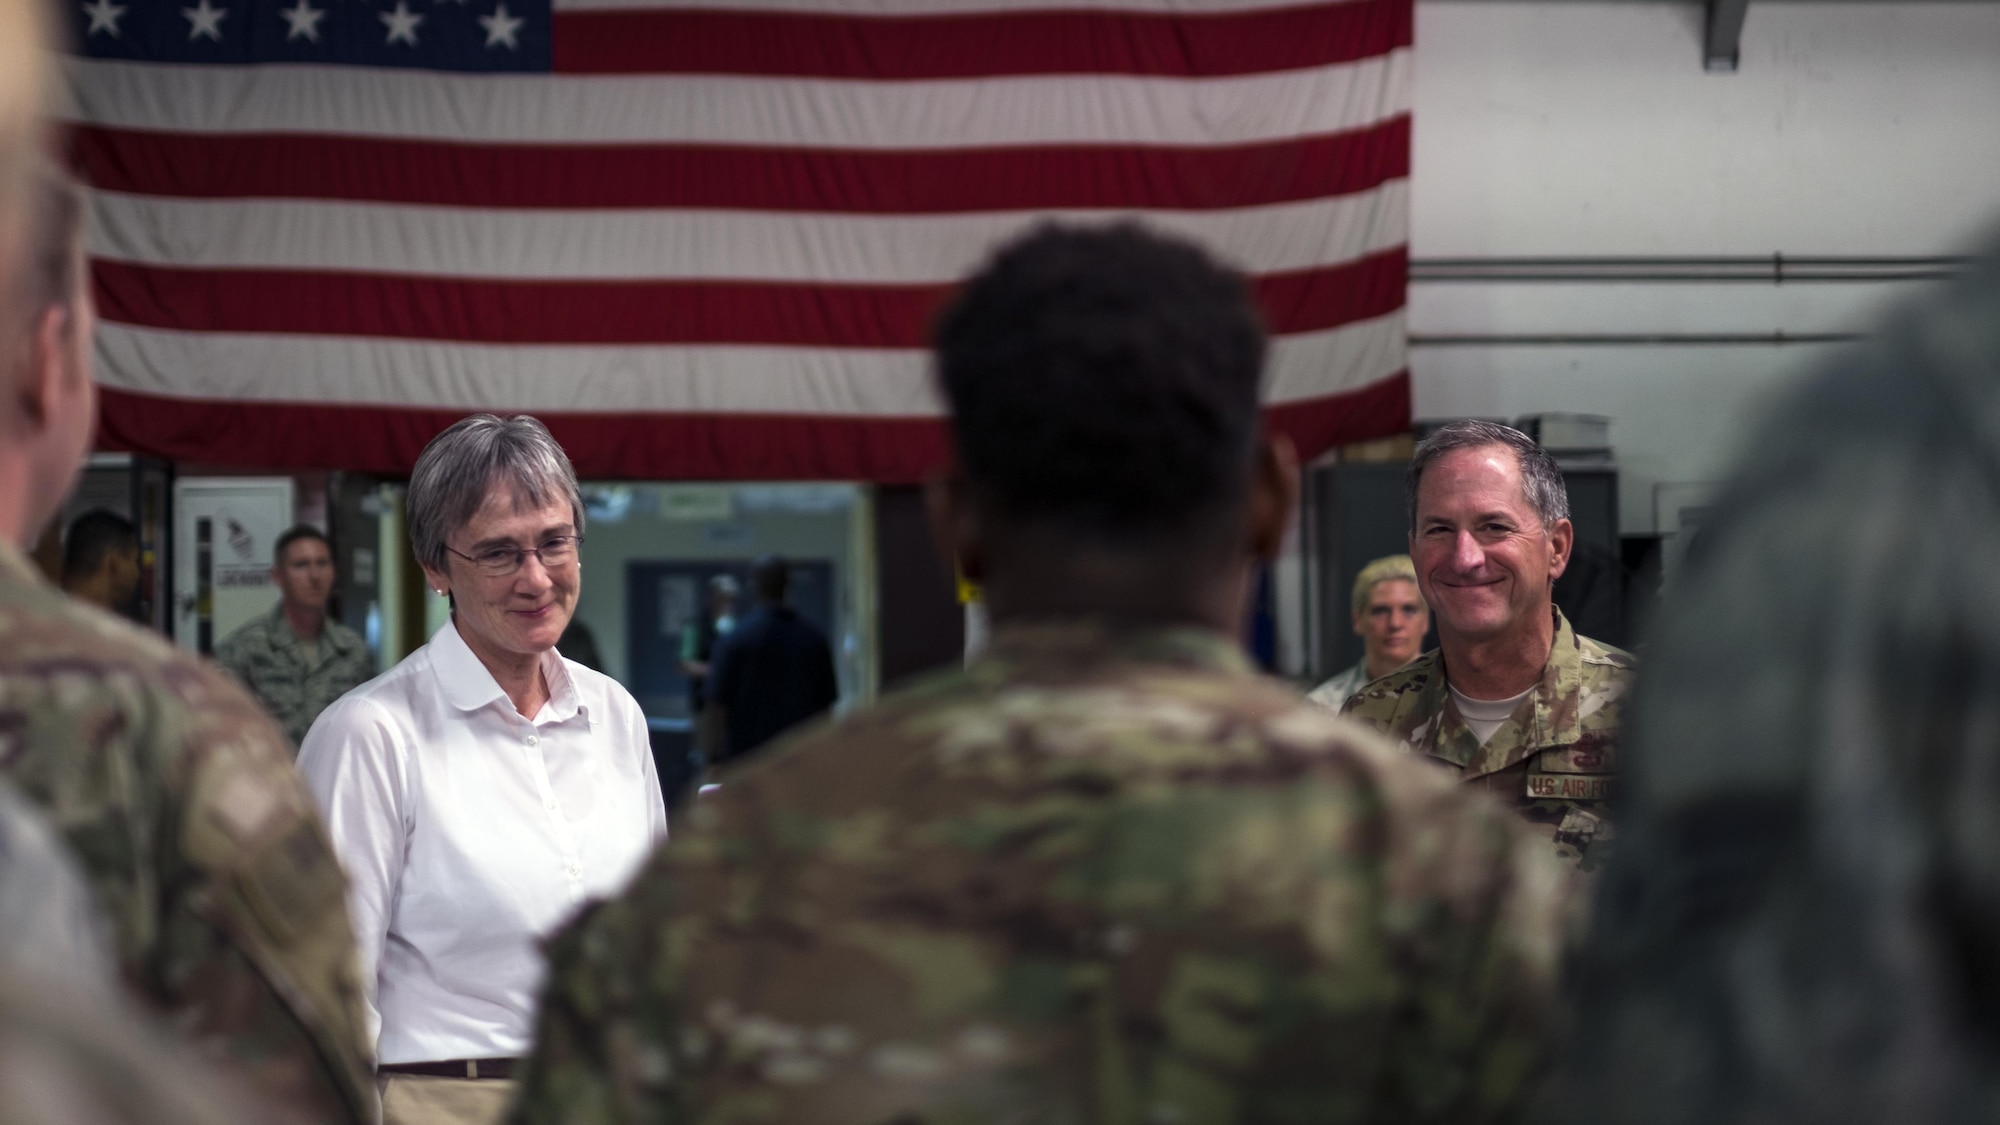 Secretary of the Air Force Heather Wilson and Air Force Chief of Staff Gen. David L. Goldfein, speak with Airmen from the 380th Air Expeditionary Wing on Aug. 18, 2017, at Al Dhafra Air Base, United Arab Emirates.